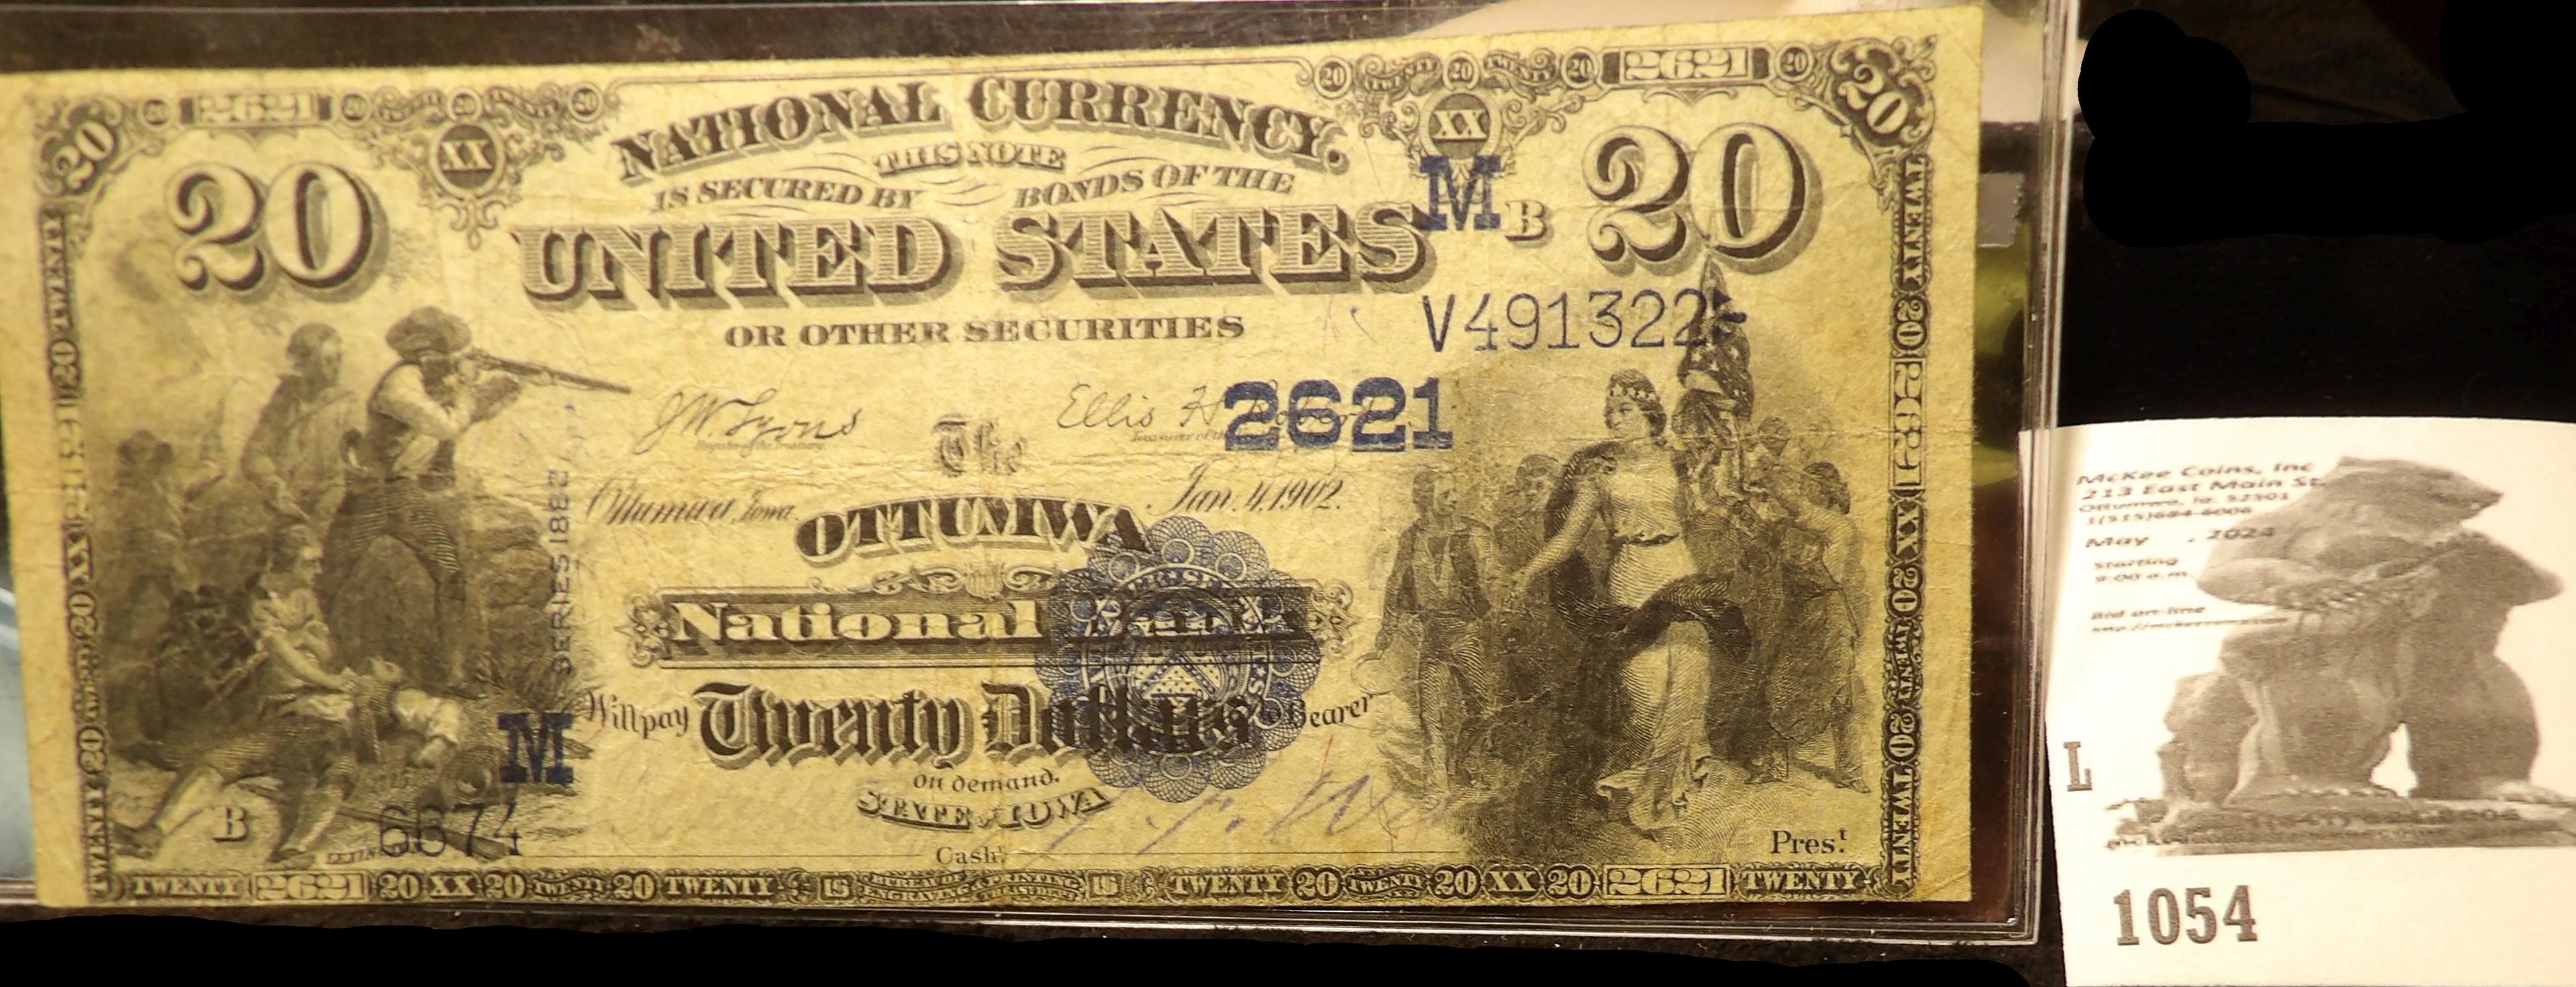 Series 1882 $20 National Currency The Ottumwa National Bank State of Iowa, Second Charter, Value Bac